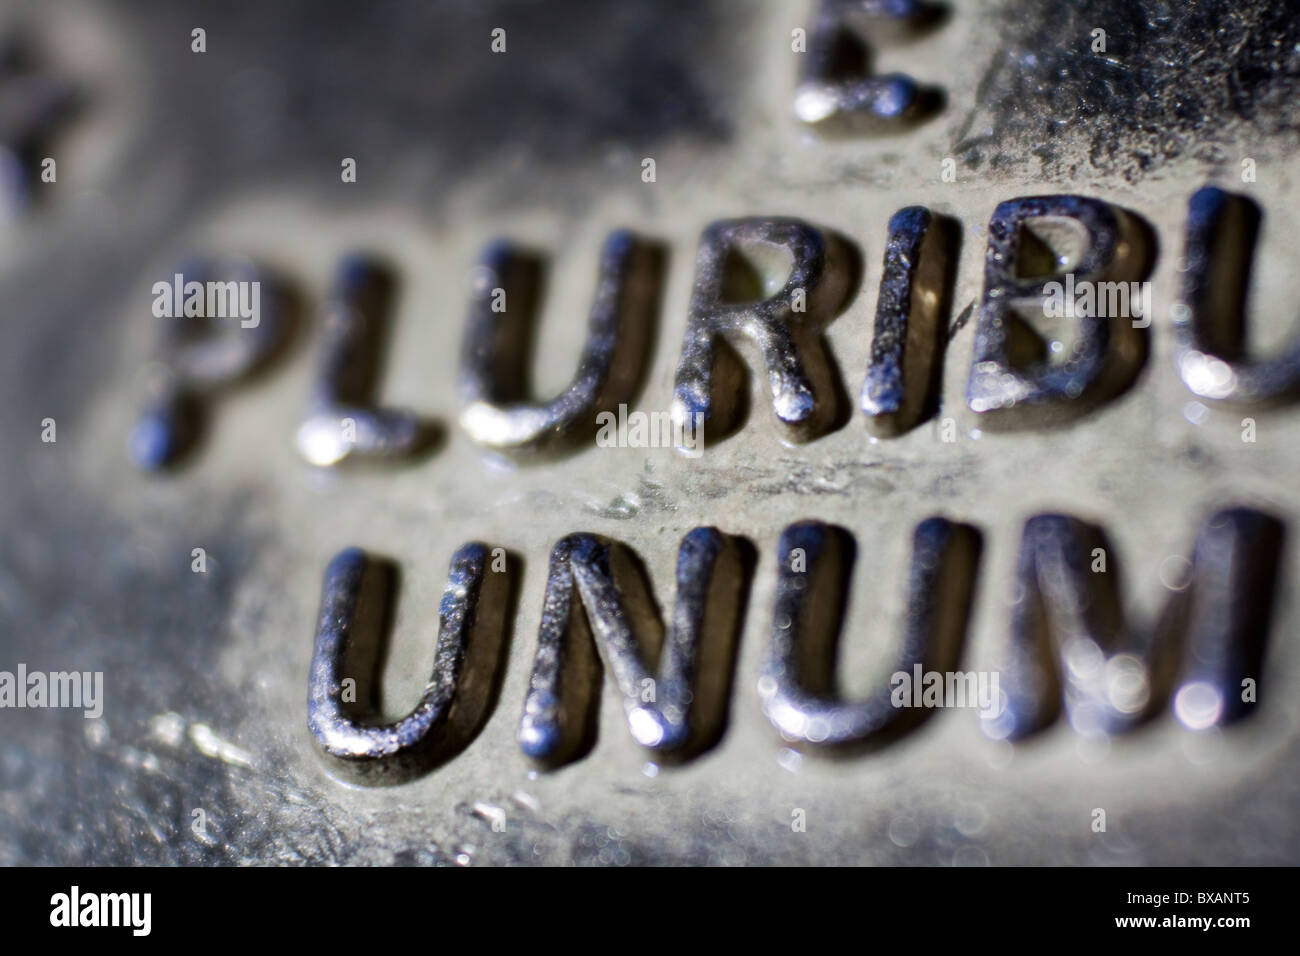 Macro Shots of Coins for Stock Stock Photo